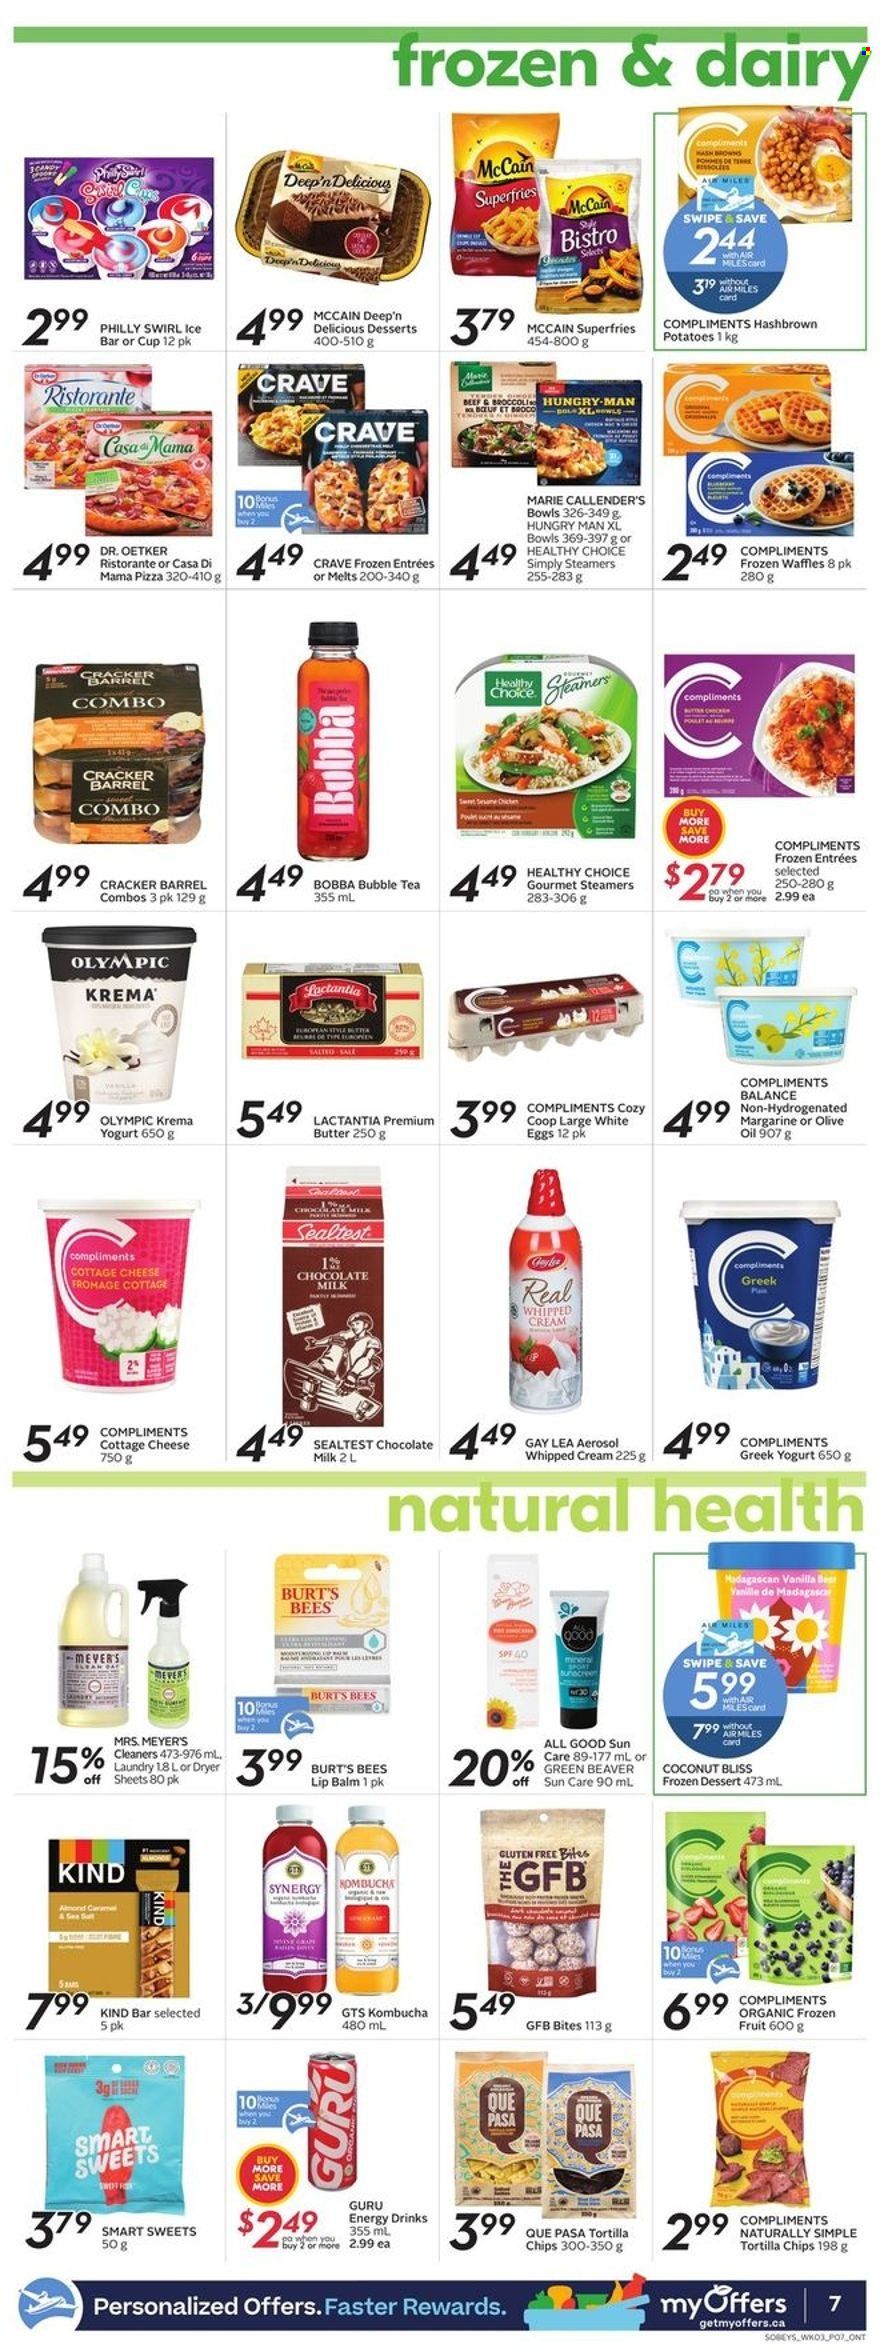 thumbnail - Sobeys Flyer - May 19, 2022 - May 25, 2022 - Sales products - waffles, potatoes, pizza, Healthy Choice, Marie Callender's, cottage cheese, Dr. Oetker, greek yoghurt, yoghurt, milk, eggs, butter, margarine, whipped cream, organic frozen fruit, McCain, potato fries, milk chocolate, chocolate, crackers, tortilla chips, olive oil, oil, energy drink, kombucha, tea, bubble tea, L'Or, lip balm. Page 8.